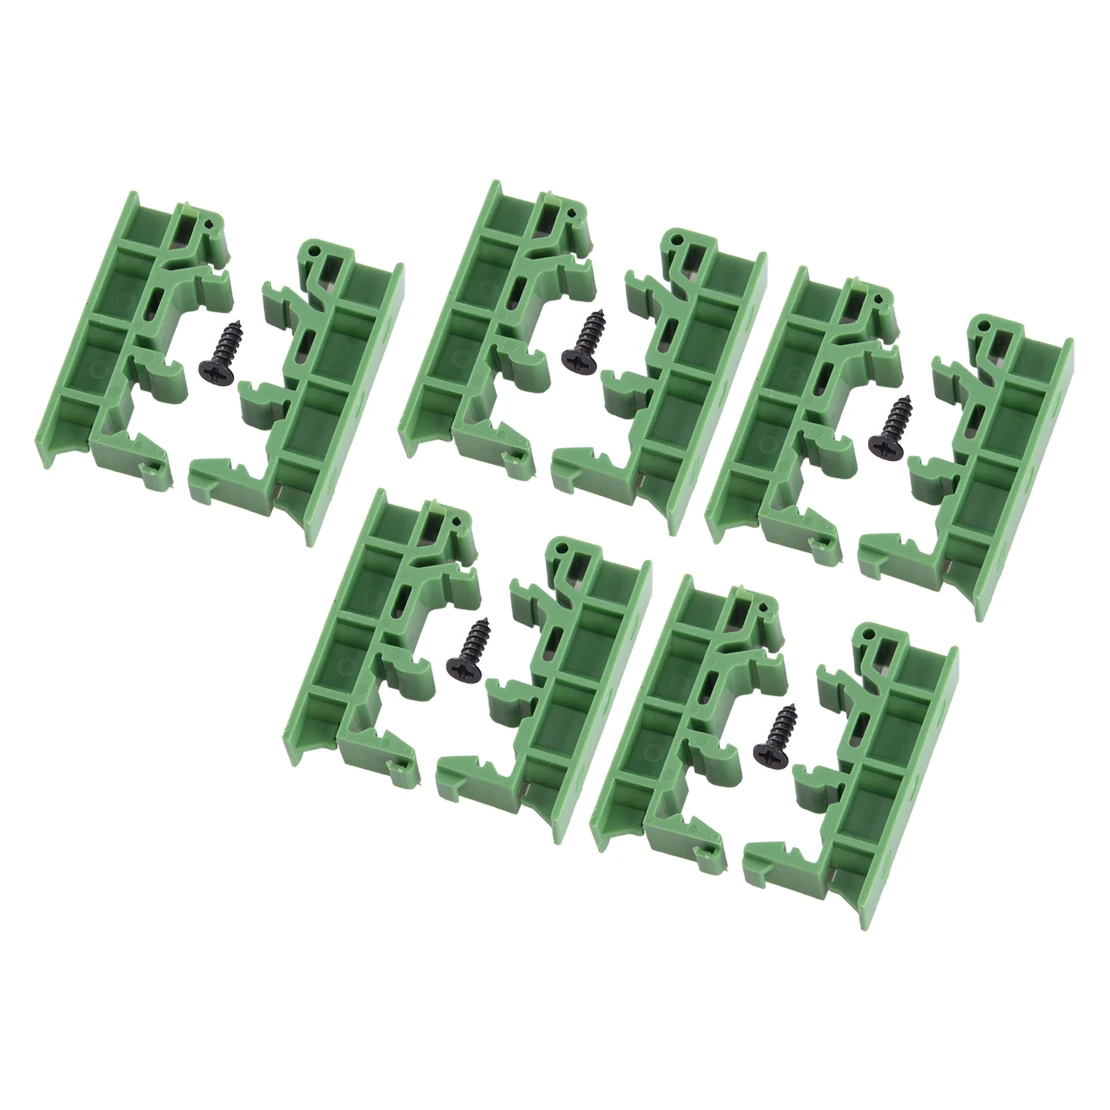 

5 Sets DRG-01 DIN 35 PCB Rail Mounting Brackets Adapter Holder Support Green